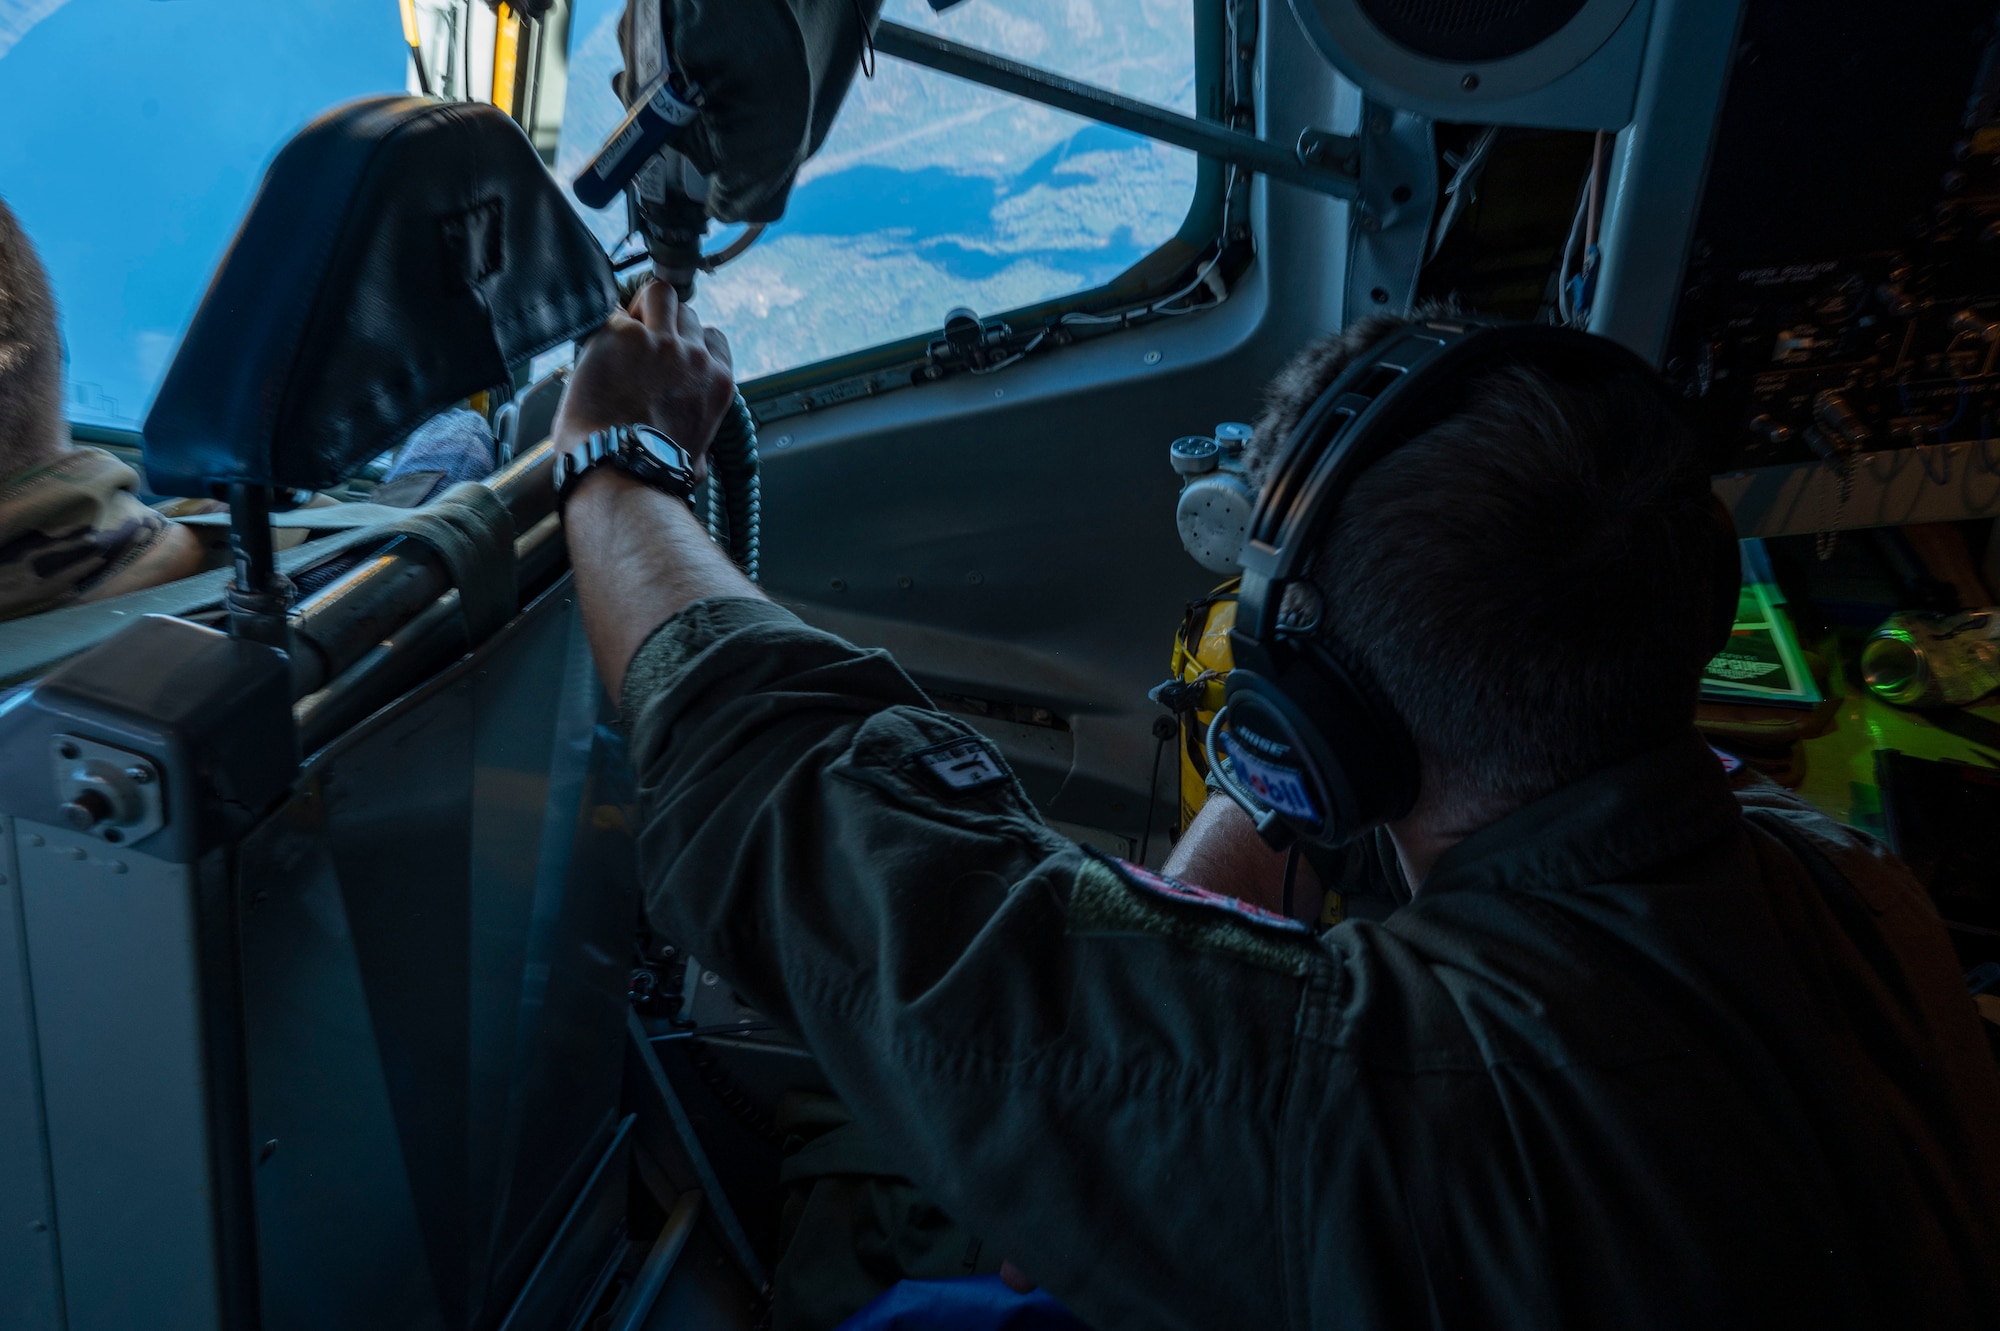 An Airman looks out the window of a plane.